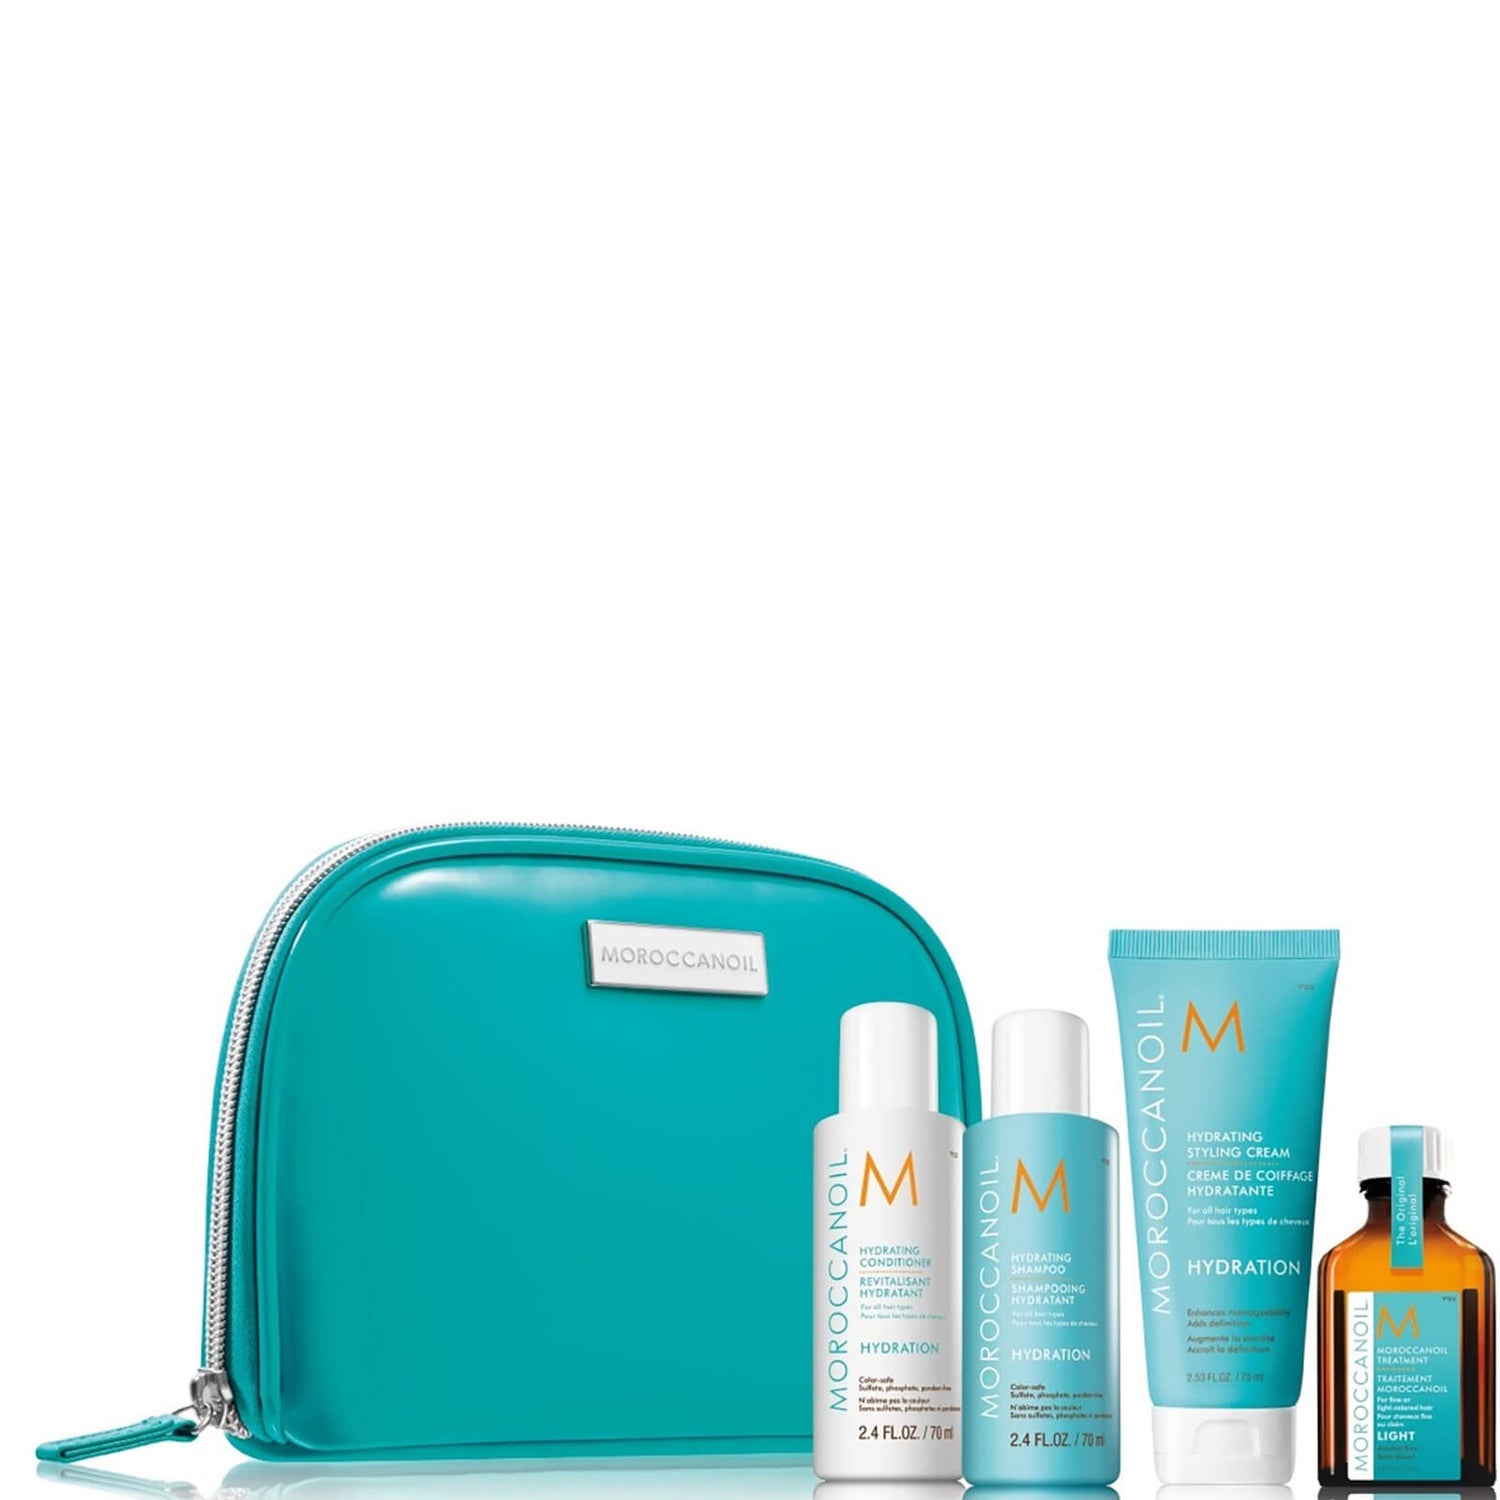 Moroccanoil Hydration Discovery Kit (Worth £35.80)